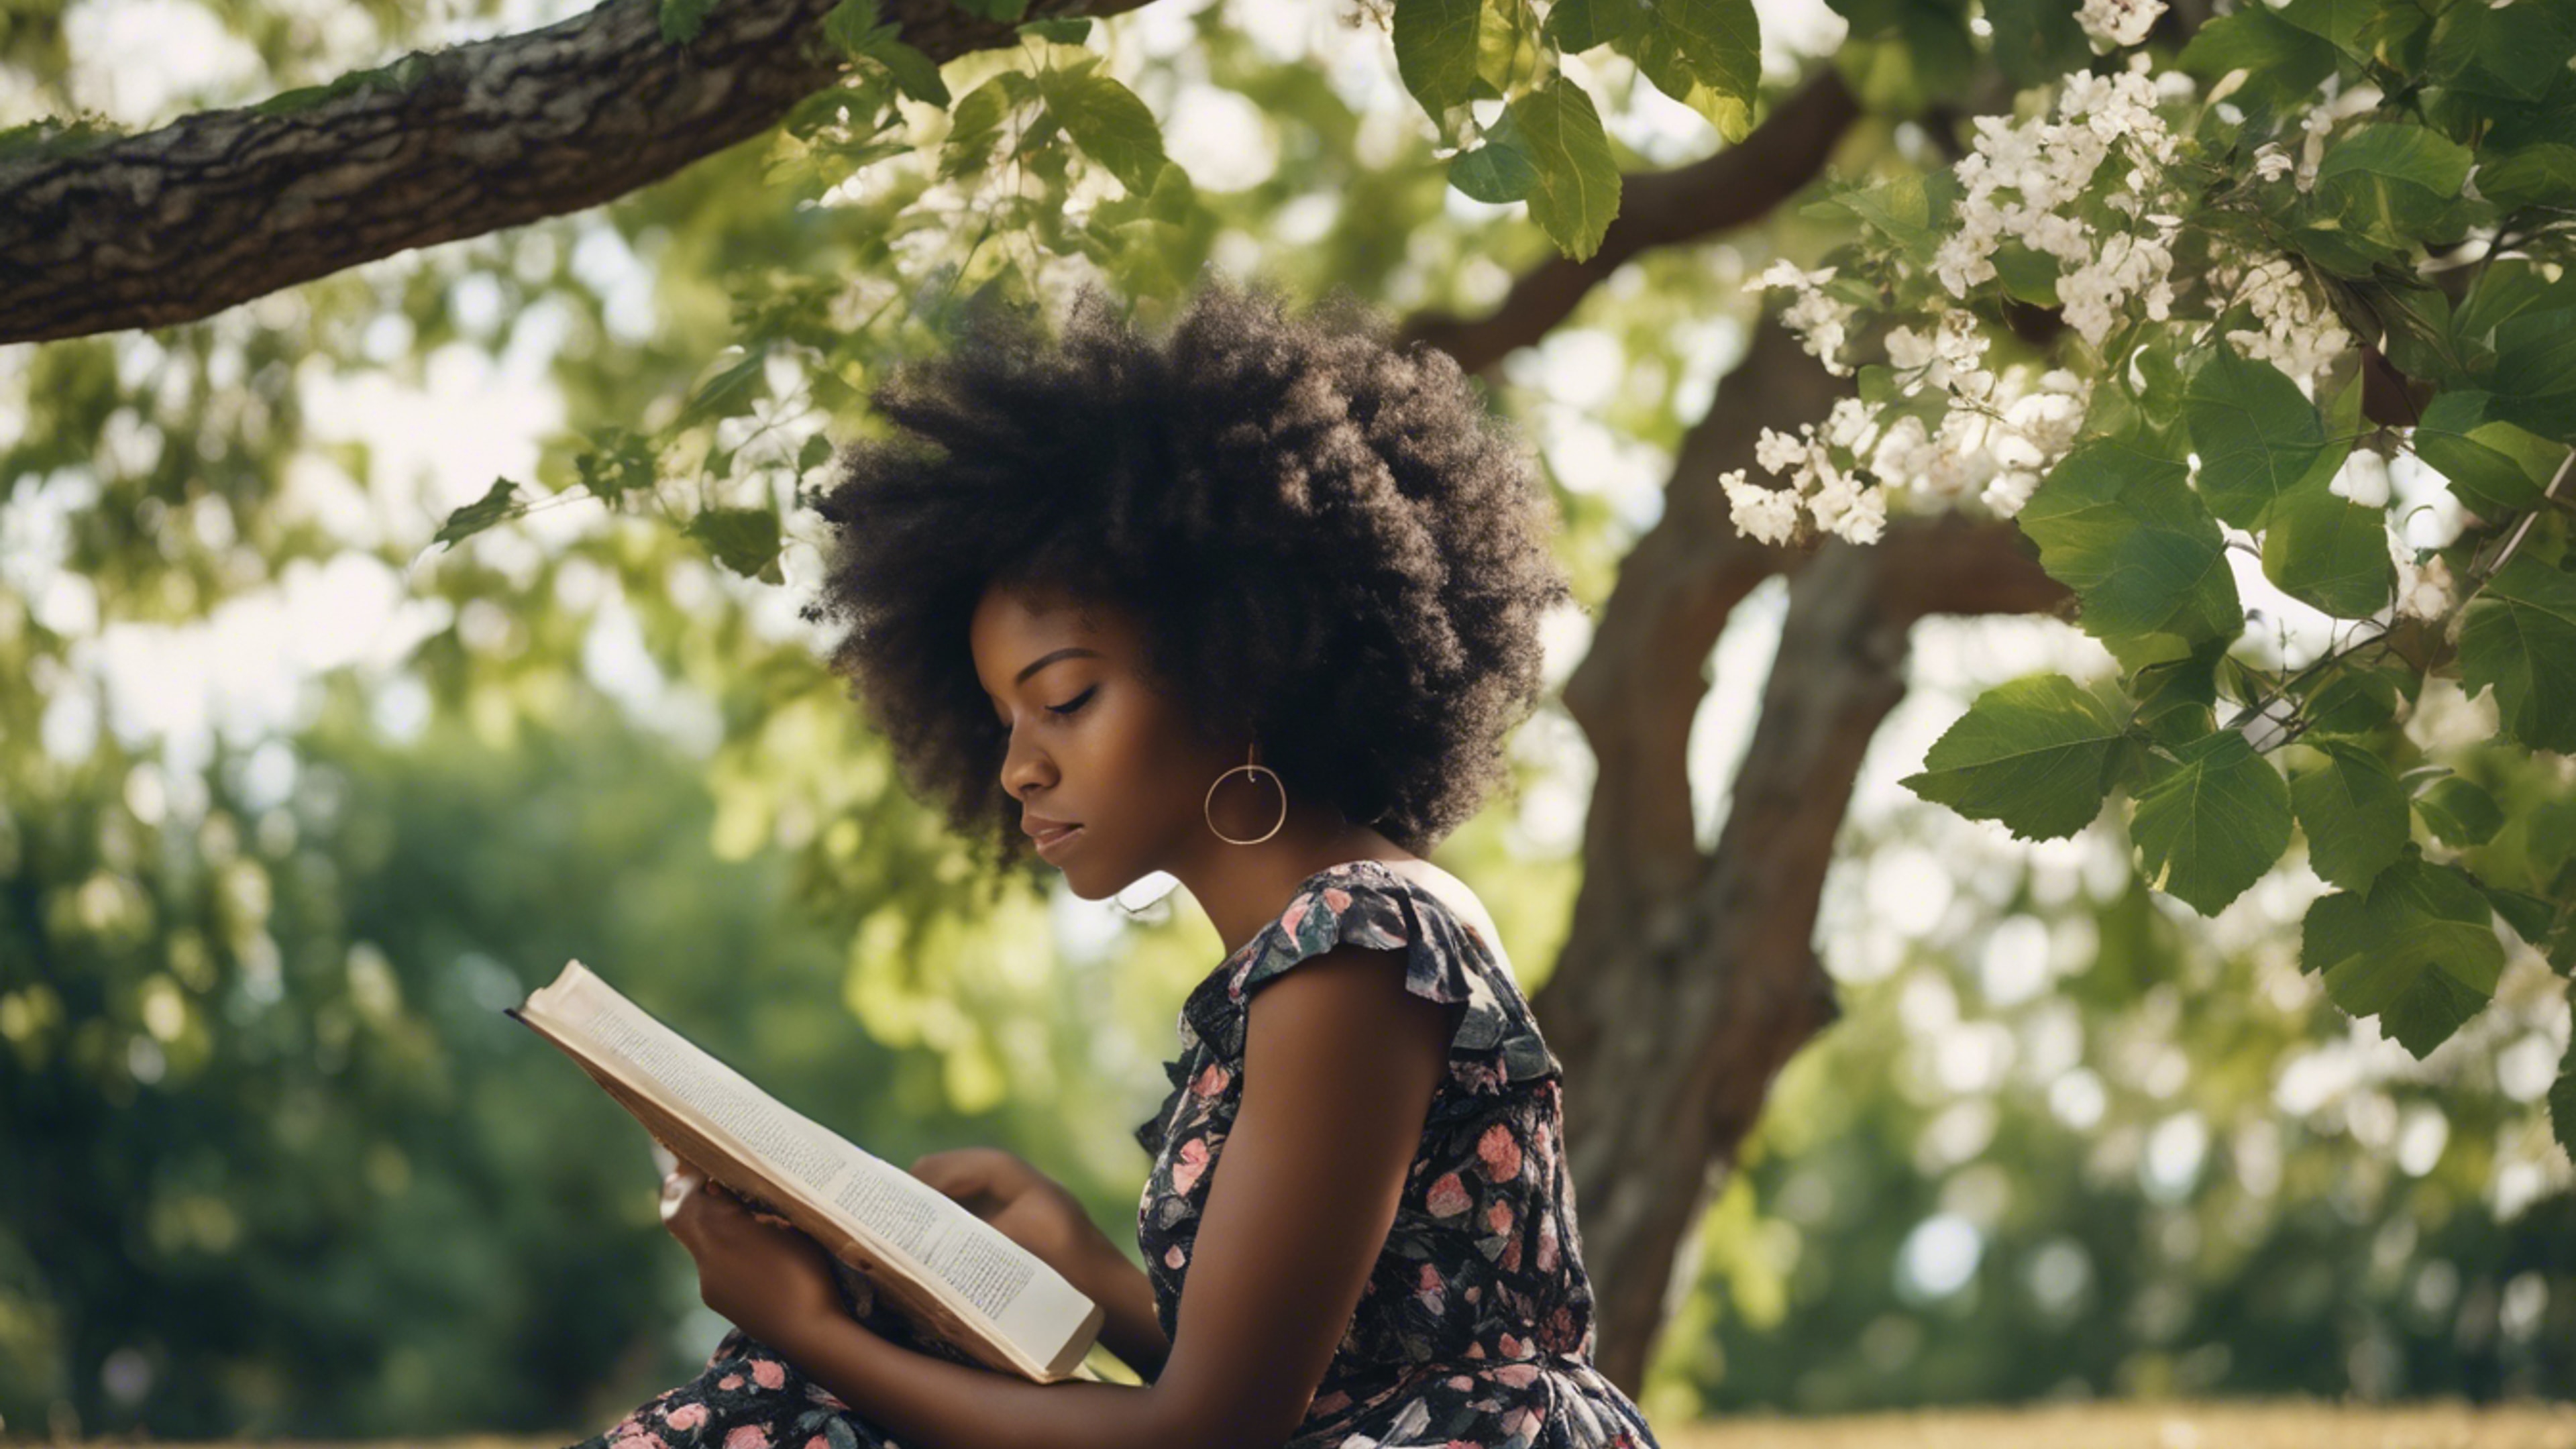 A black girl wearing a floral summer dress, reading a book under a leafy tree. Tapet[43e6f52508fc47b3bd35]